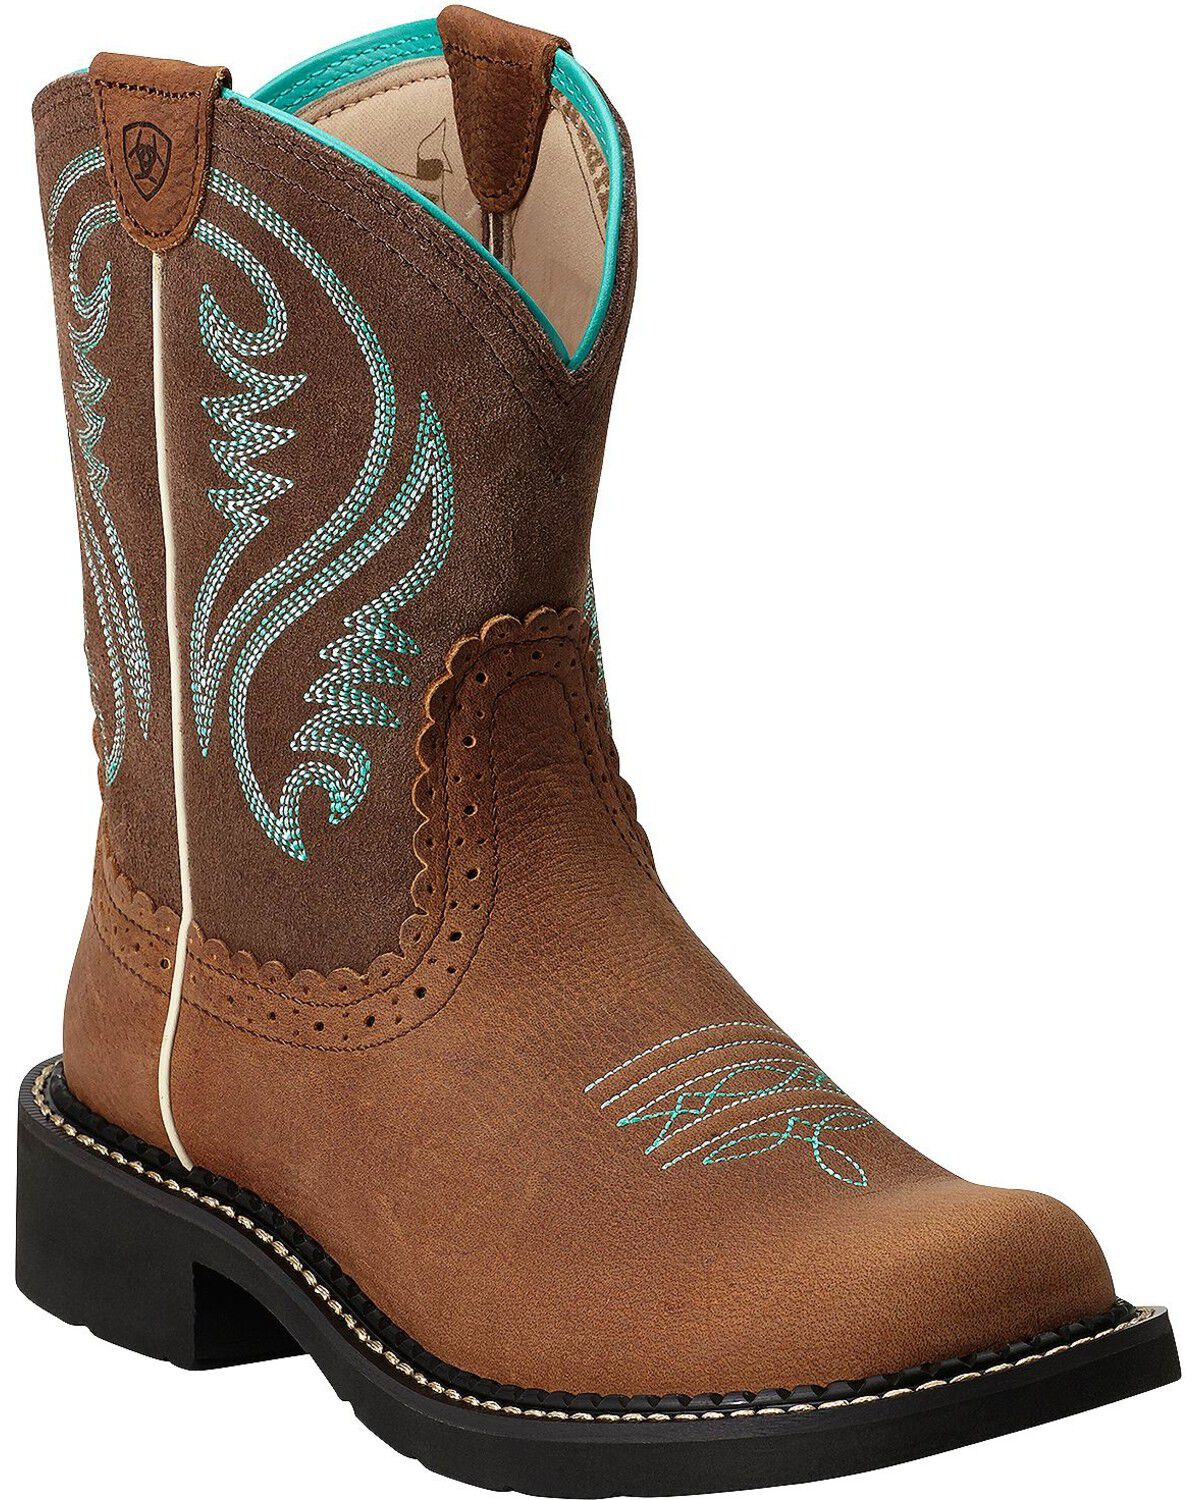 Fatbaby Heritage Cowgirl Boots 